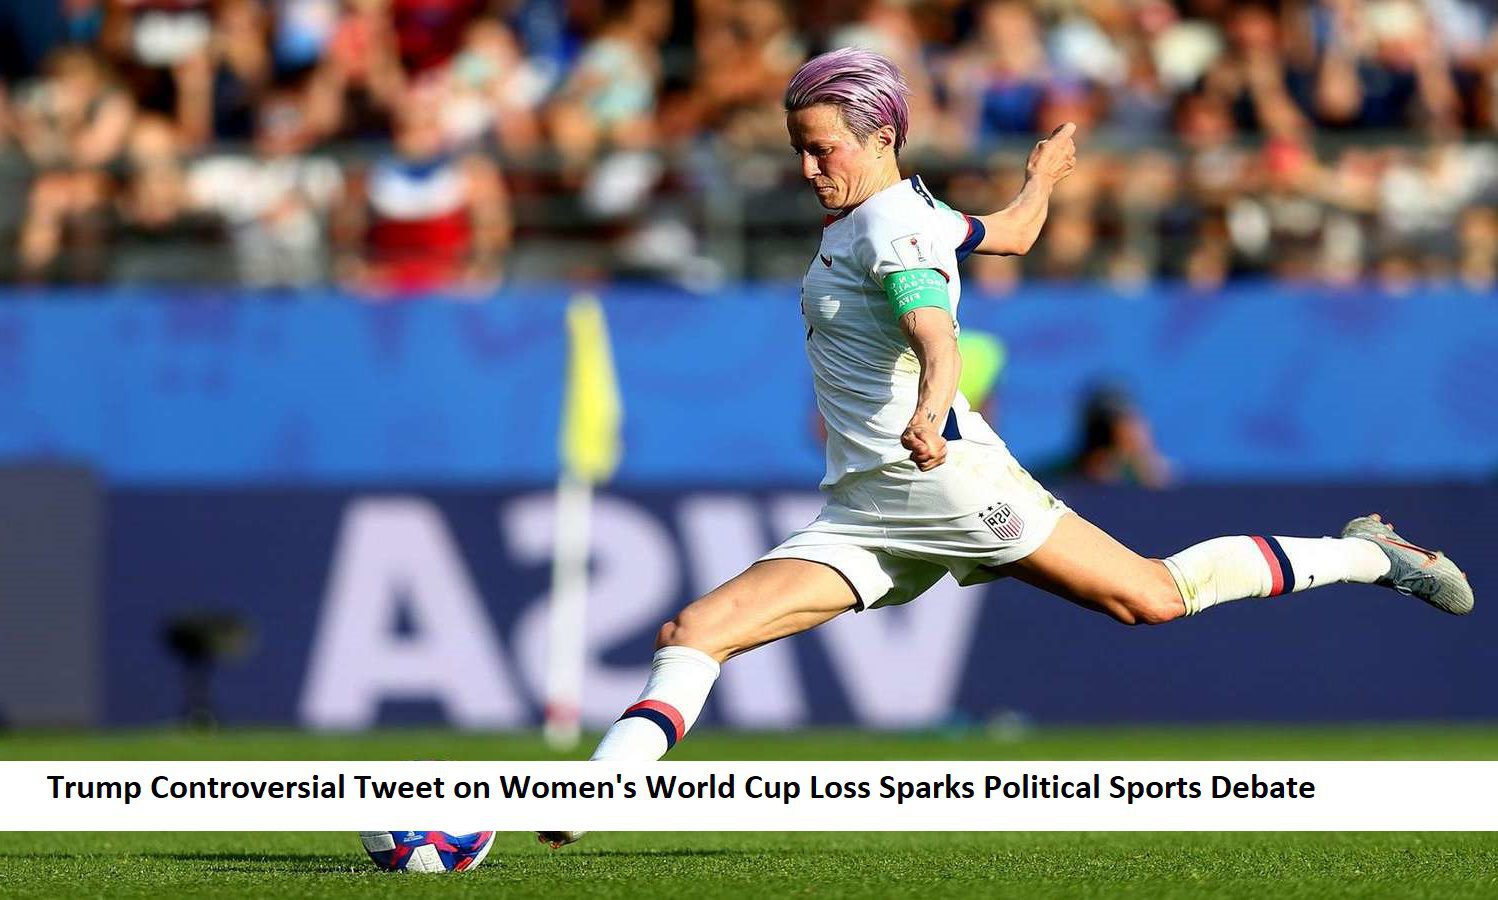 Trump Controversial Tweet on Women's World Cup Loss Sparks Political Sports Debate